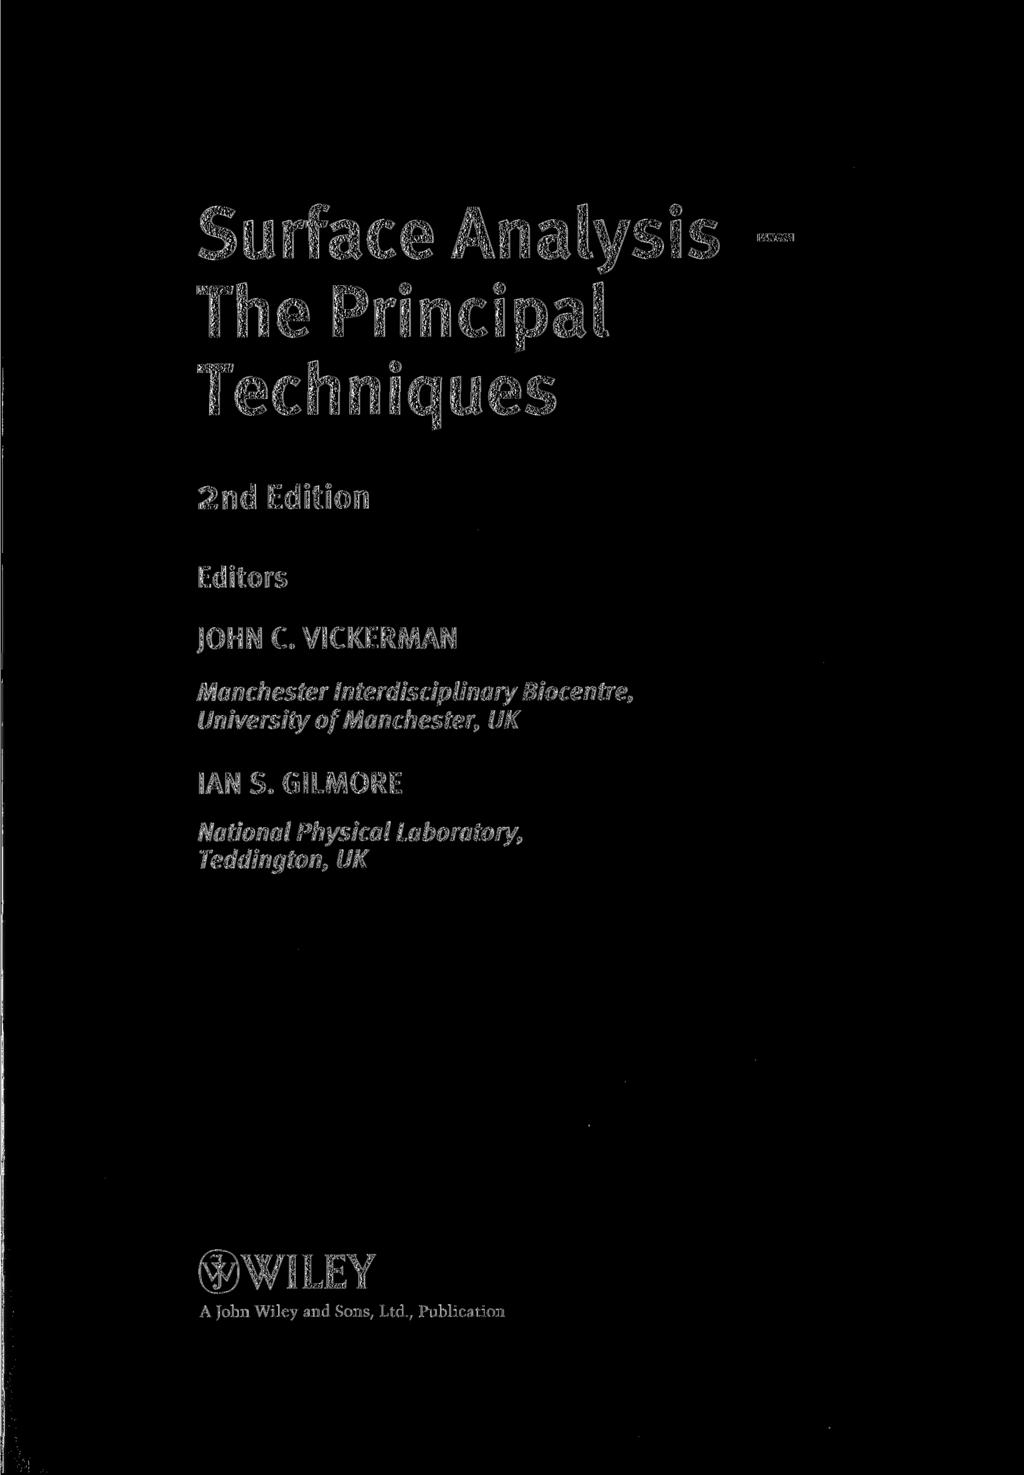 Surface Analysis - The Principal Techniques 2nd Edition Editors johnc.